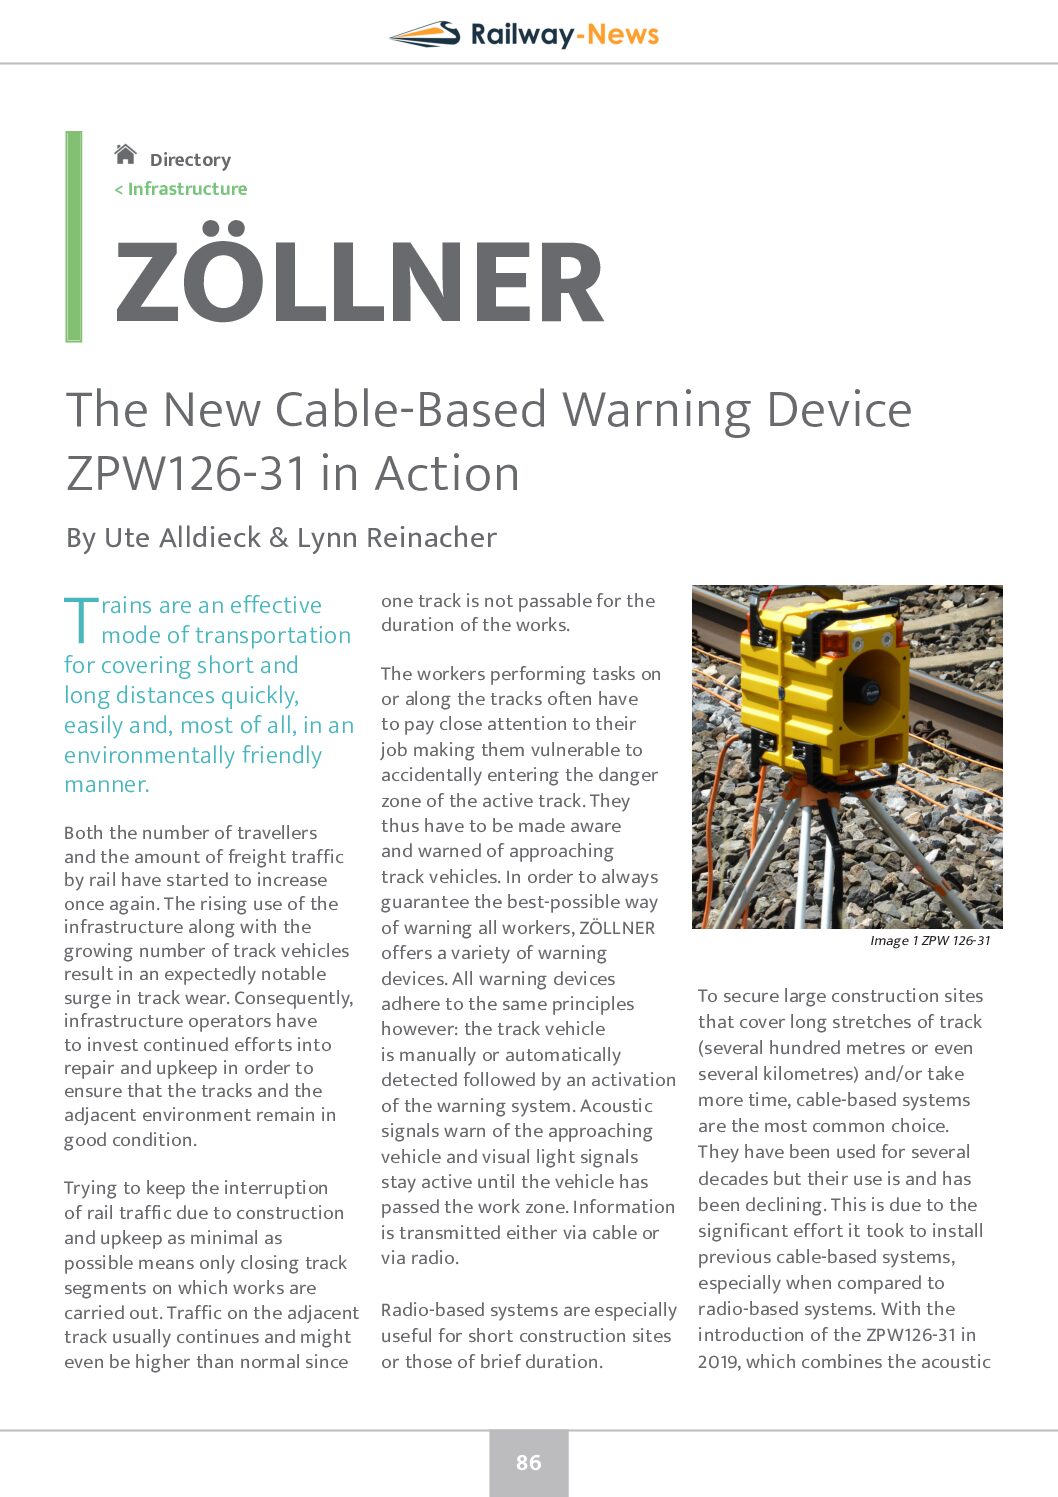 The New Cable-Based Warning Device ZPW126-31 in Action